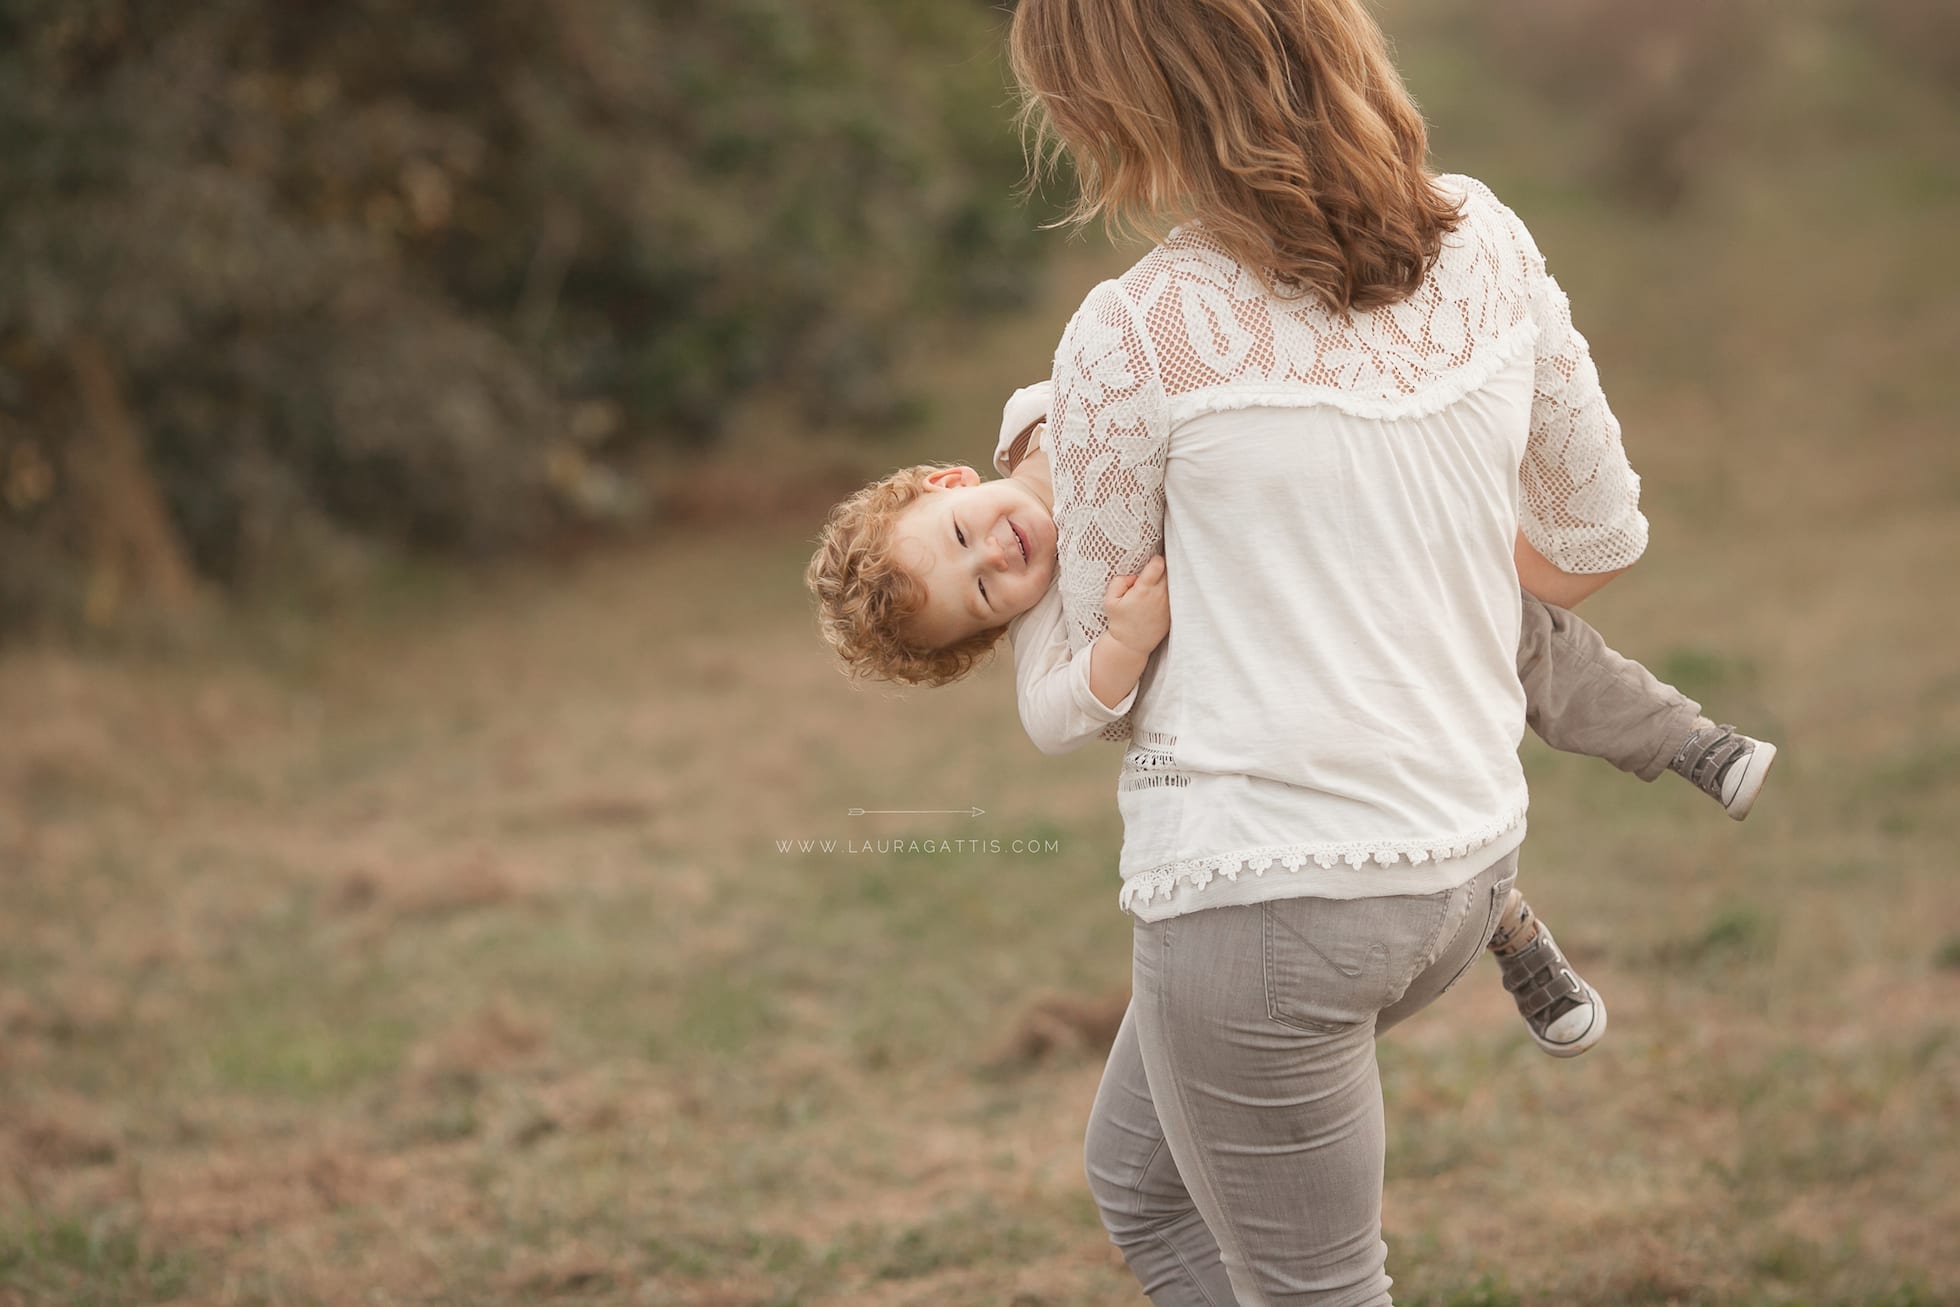 mother and son at play | laura gattis photography